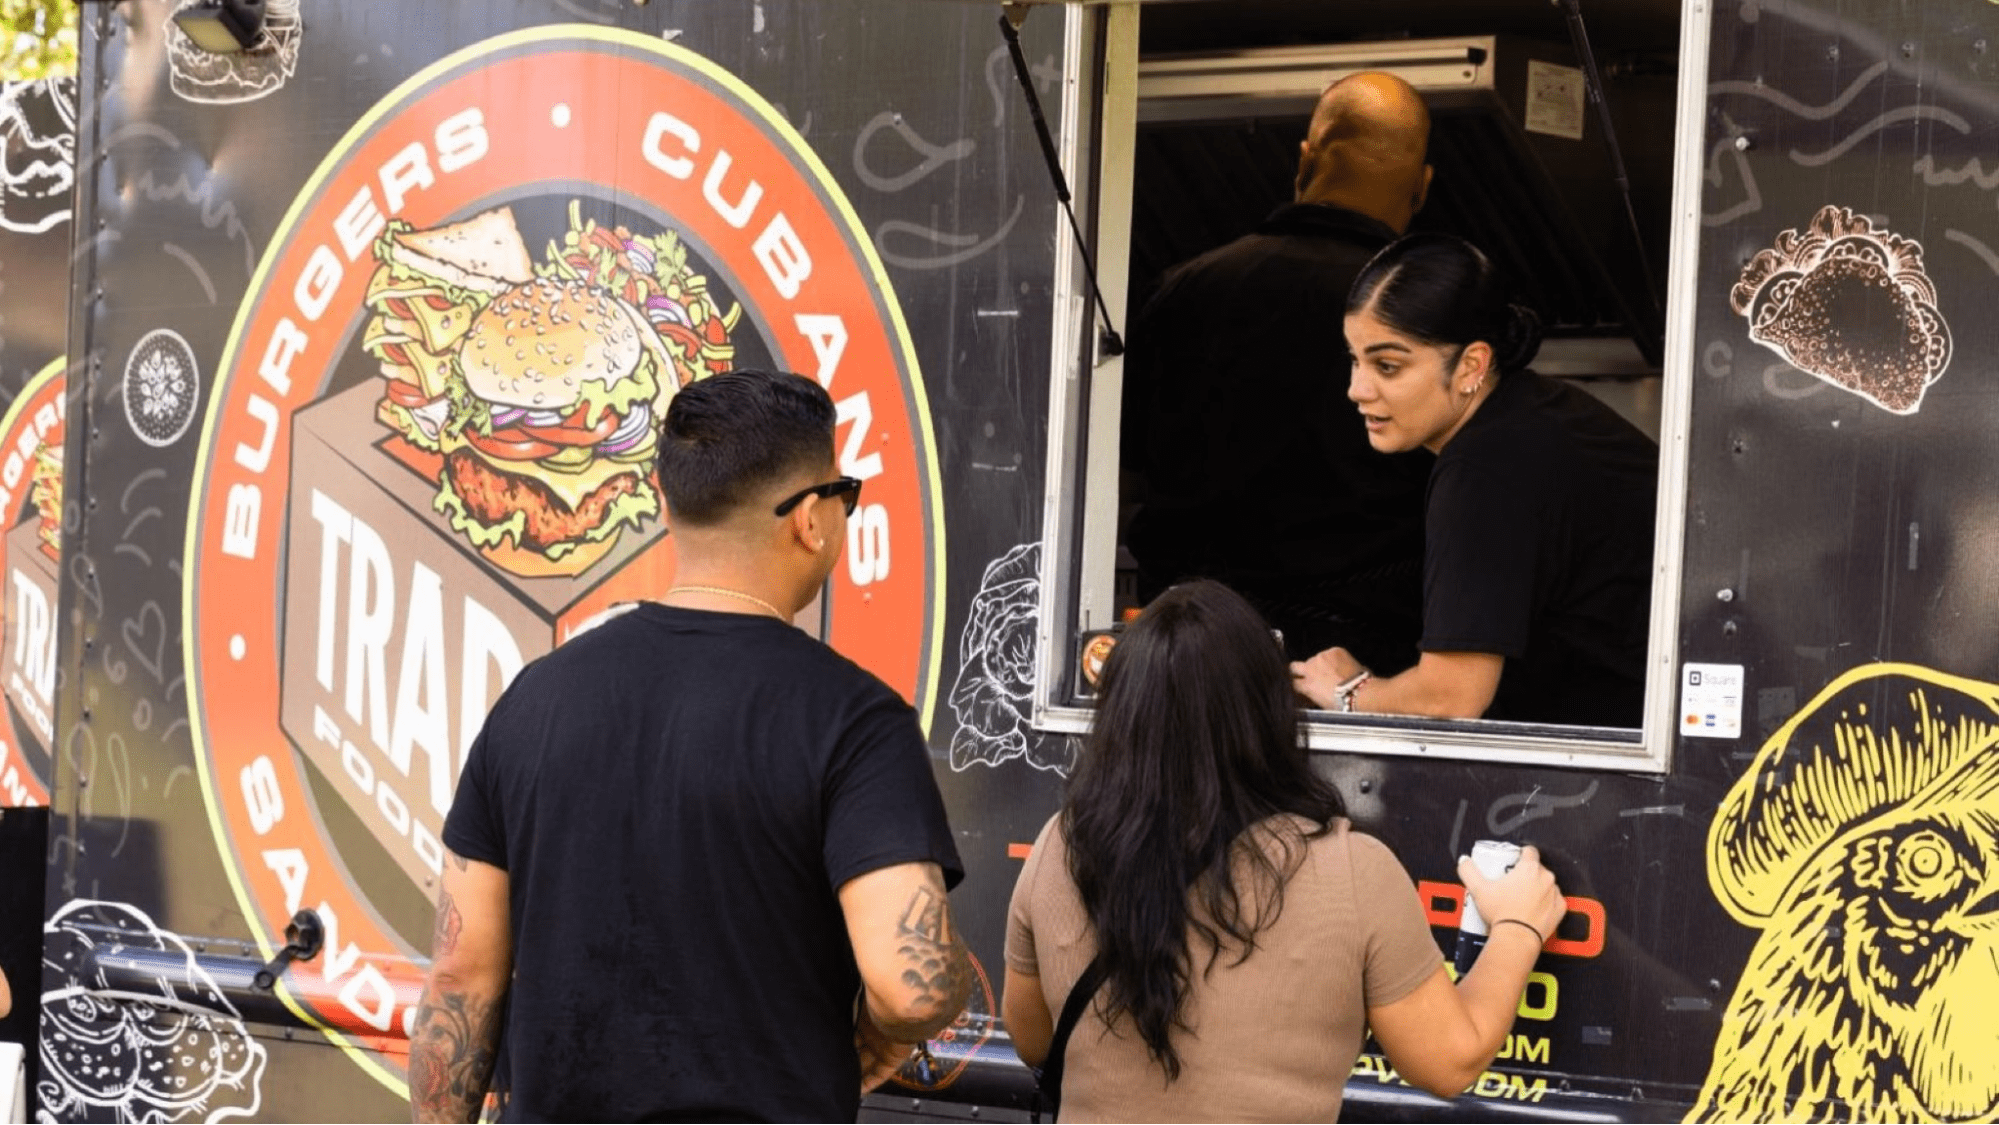 People getting food from a food truck 